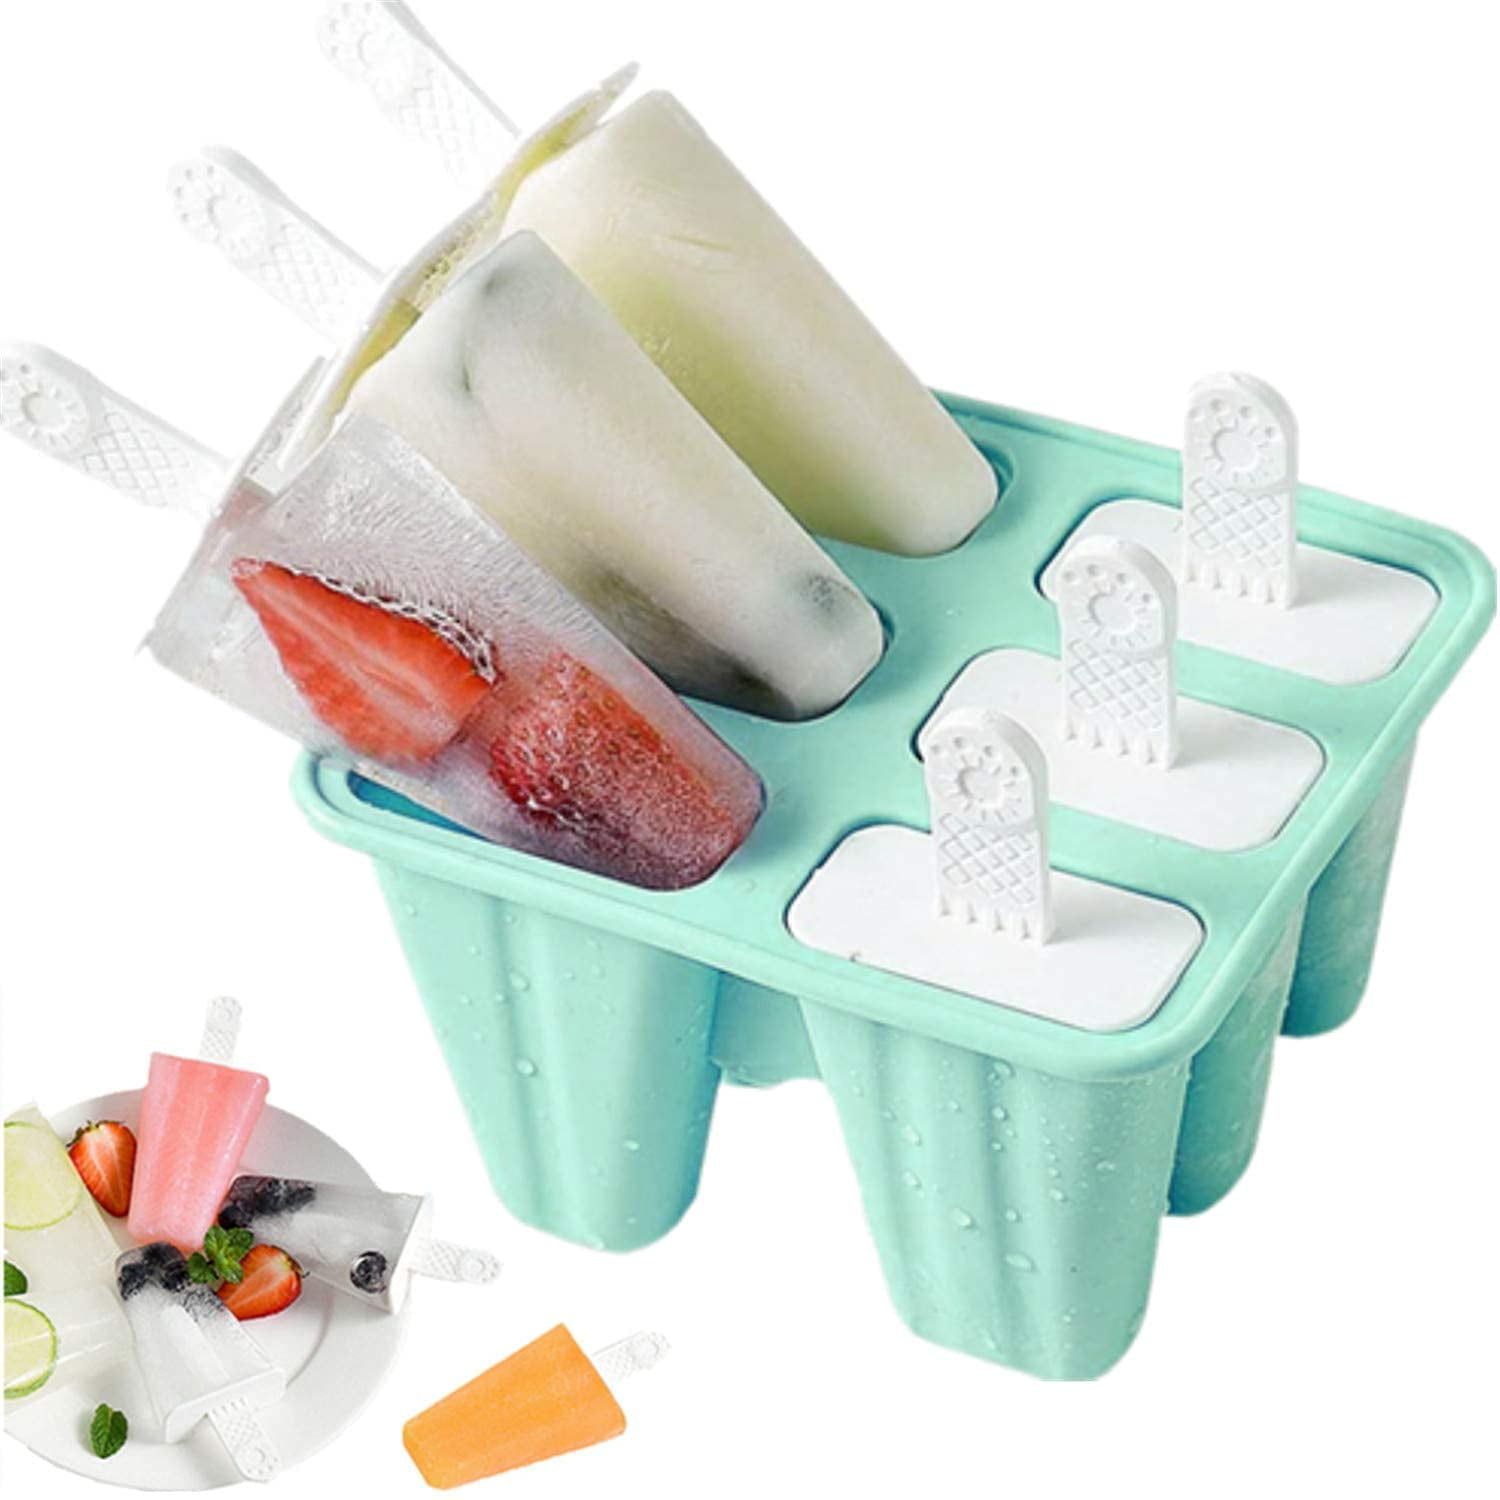 ASA Popsicles Molds, 8 Piece Ice Pop Mold, Reusable Easy Release Ice Cream Mold for Kids, Many Shapes Homemade Popsicle Molds, DIY Popsicle Maker, BPA Fre